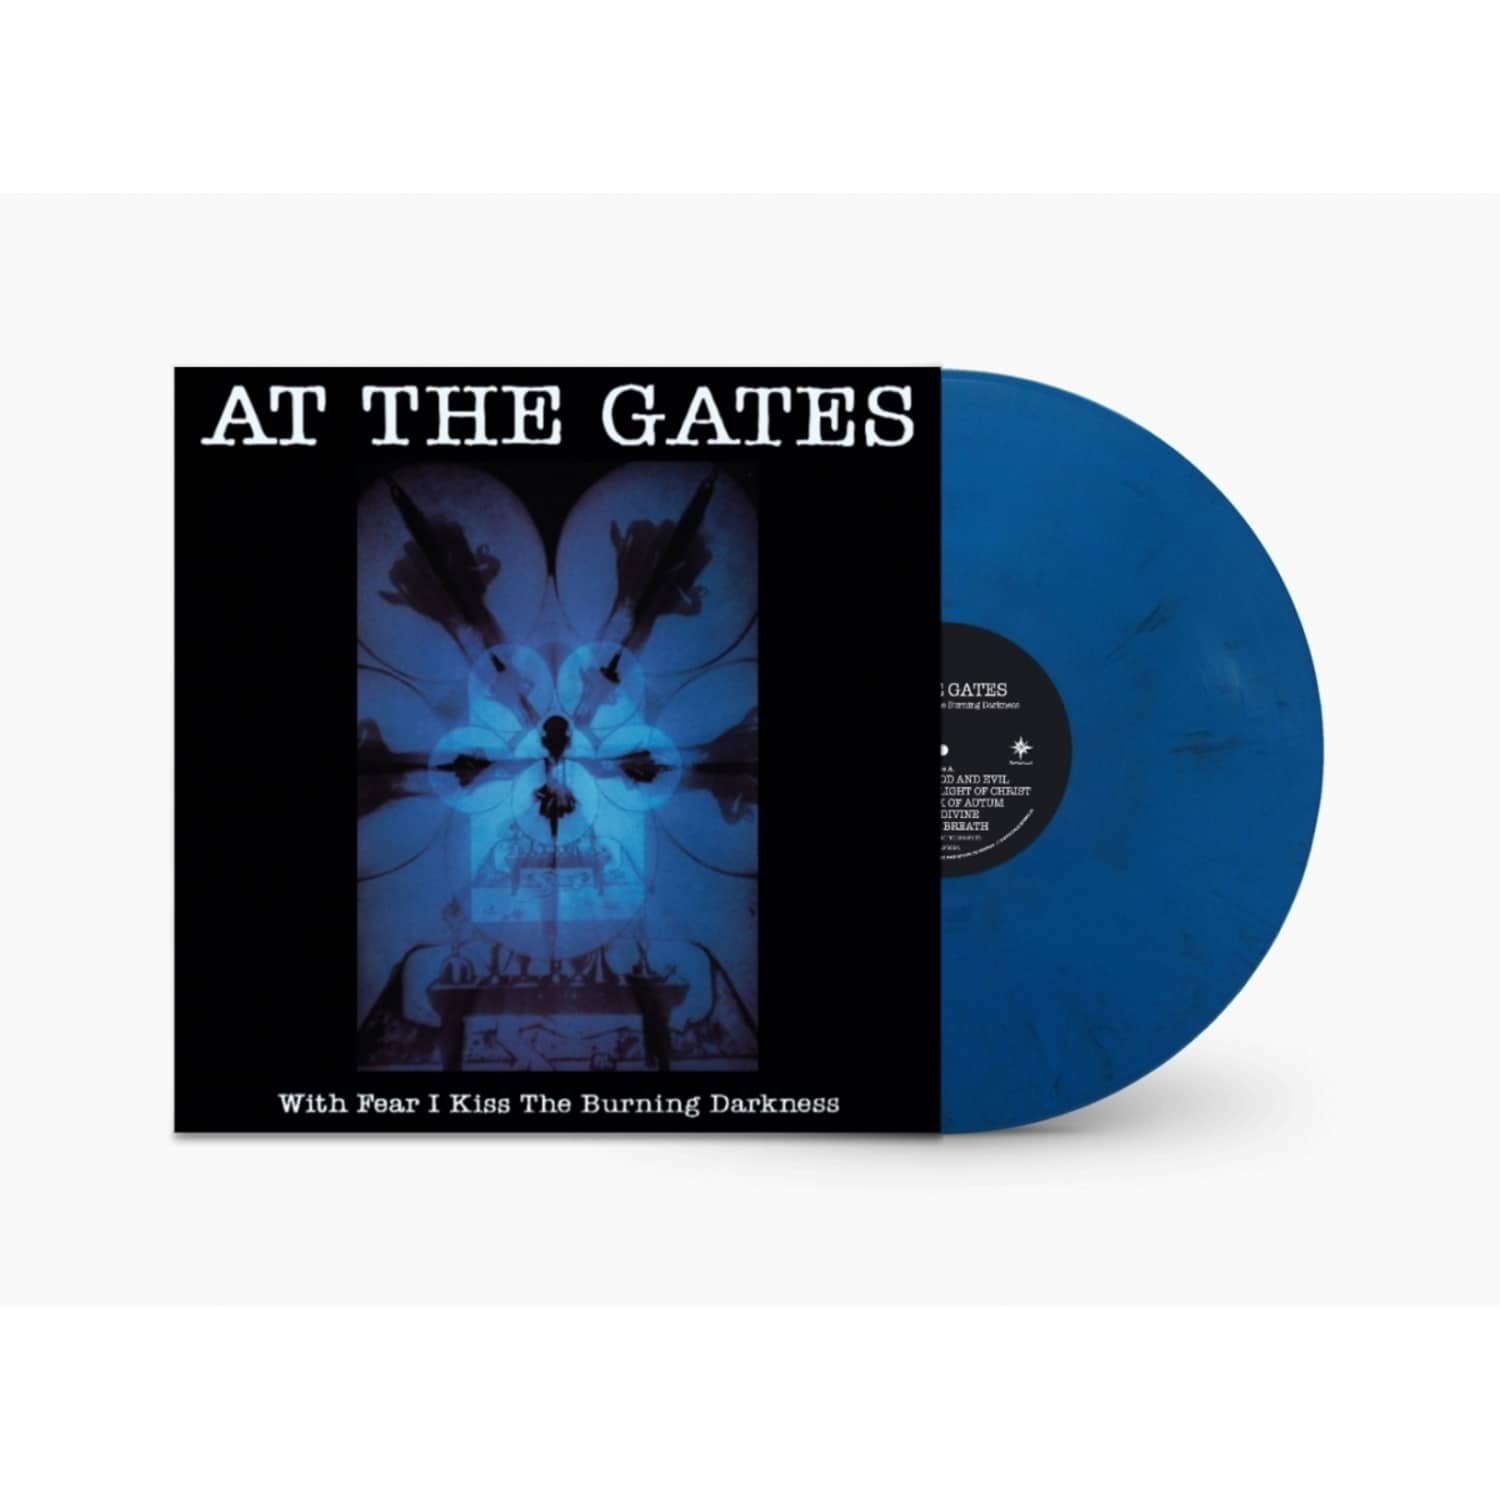 At The Gates - WITH FEAR I KISS THE BURNING DARKNESS 